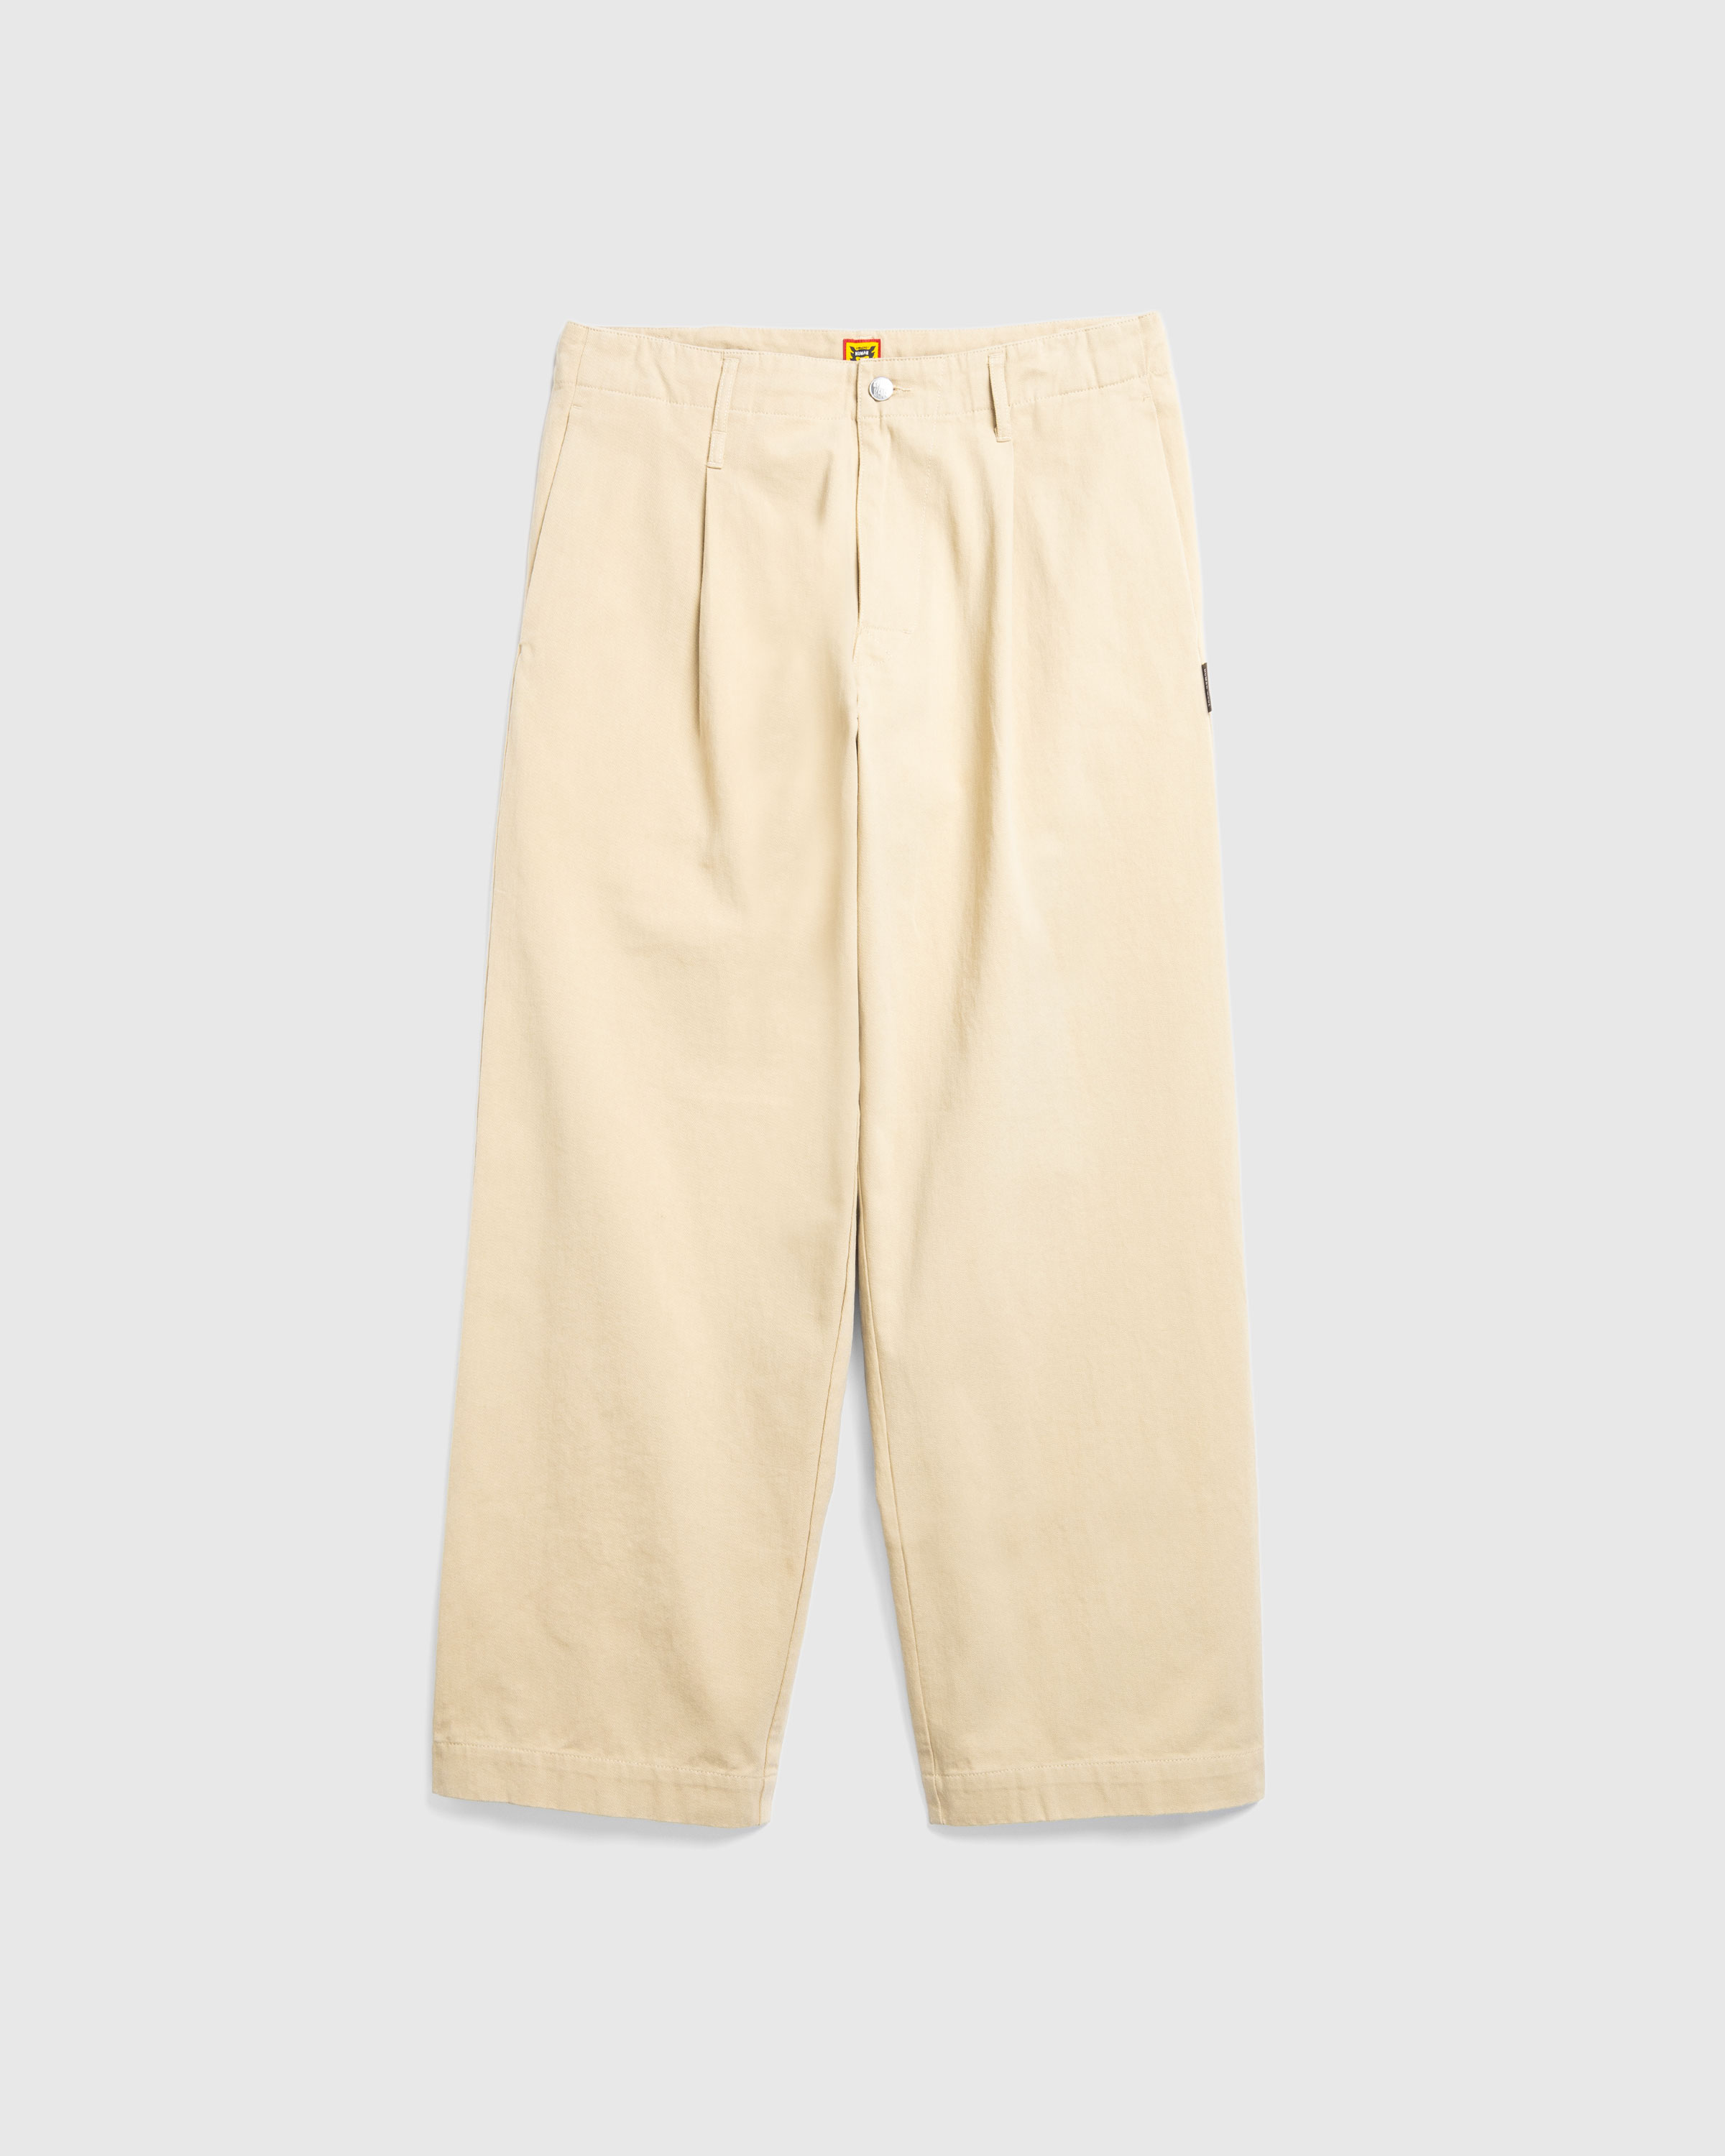 Human Made – Skater Pants Beige - Trousers - Beige - Image 1